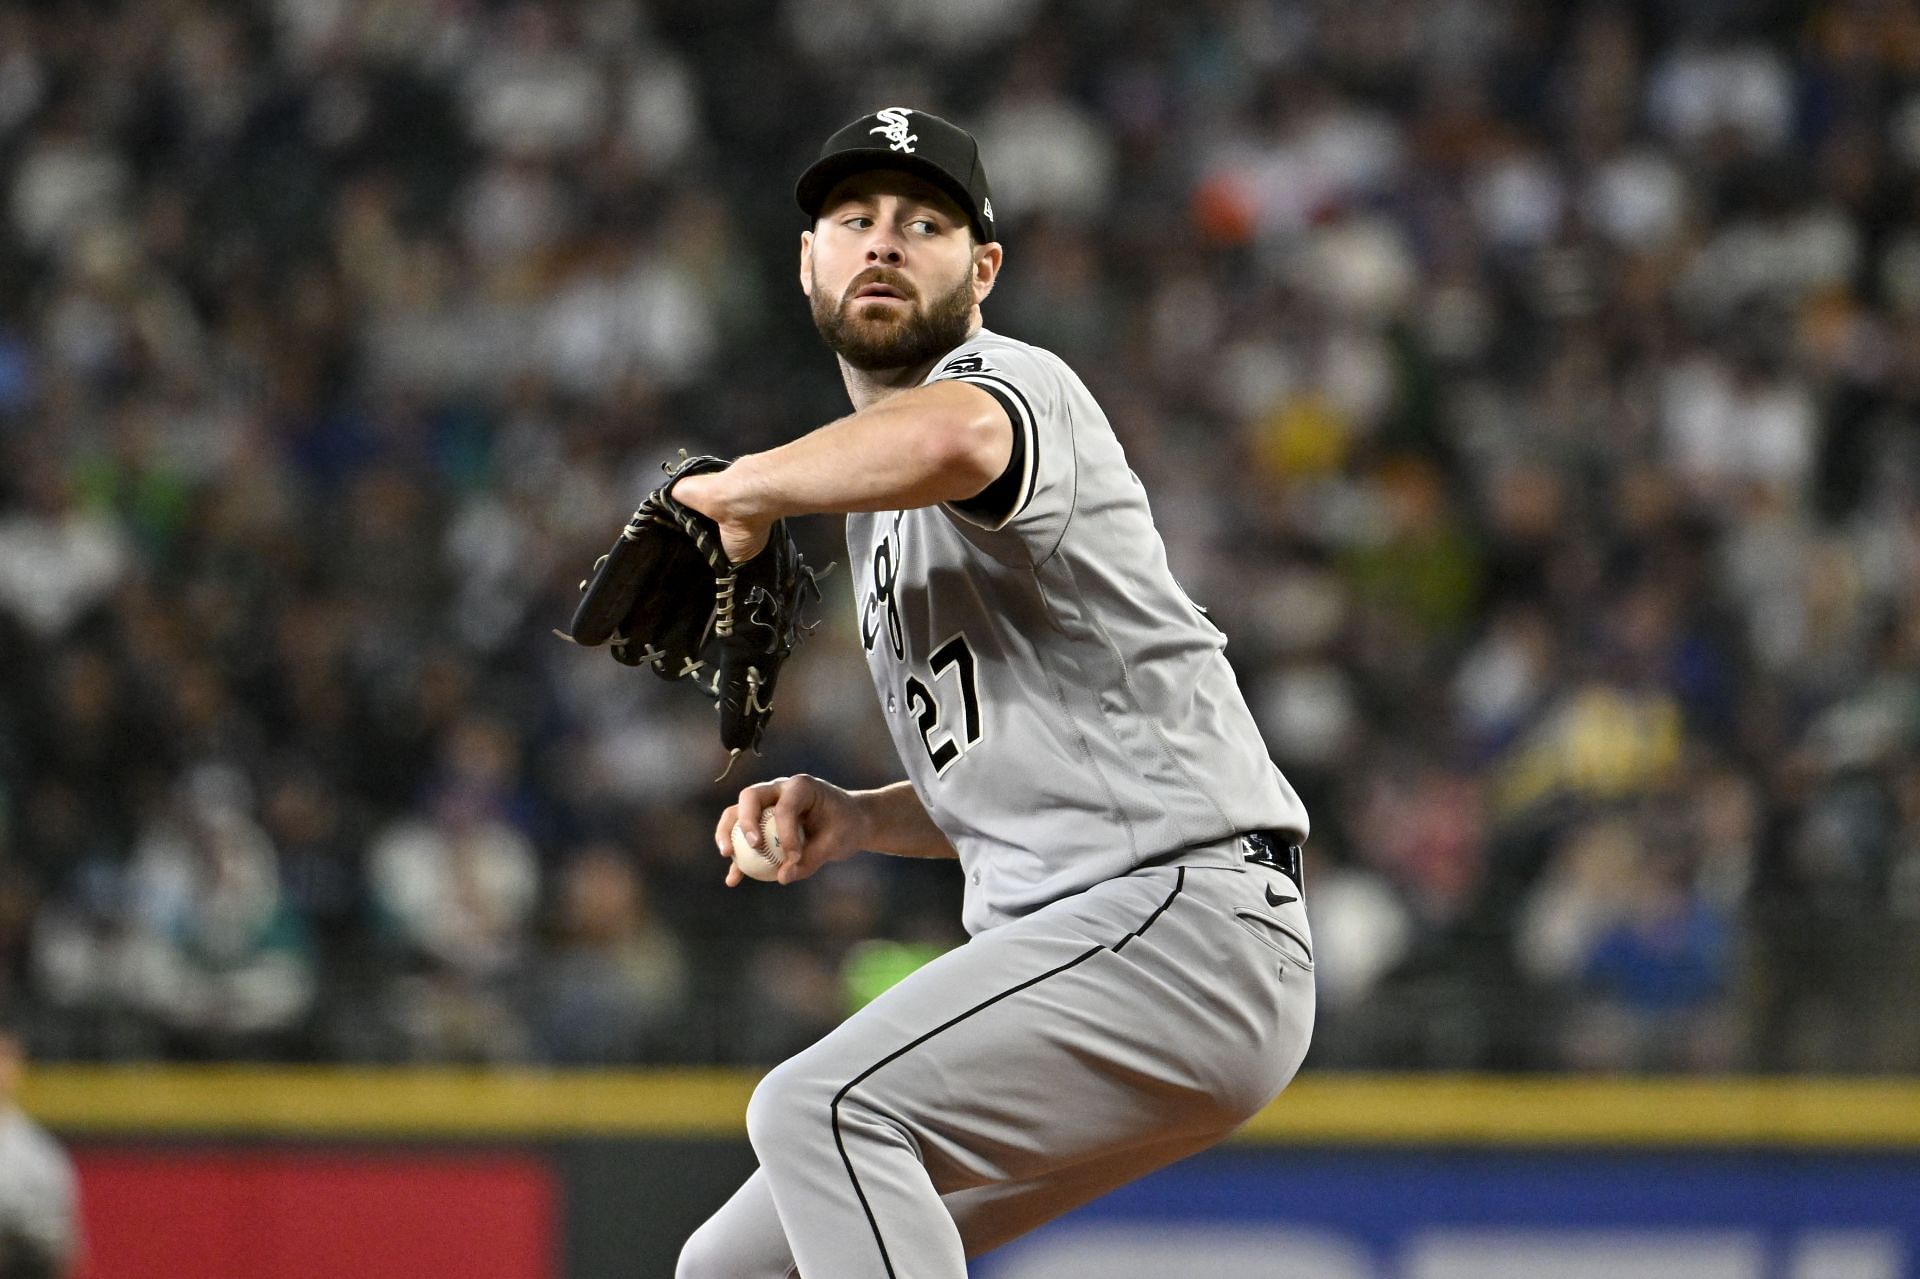 Lucas Giolito could be a secure option for the Astros to fortify their starting rotation.